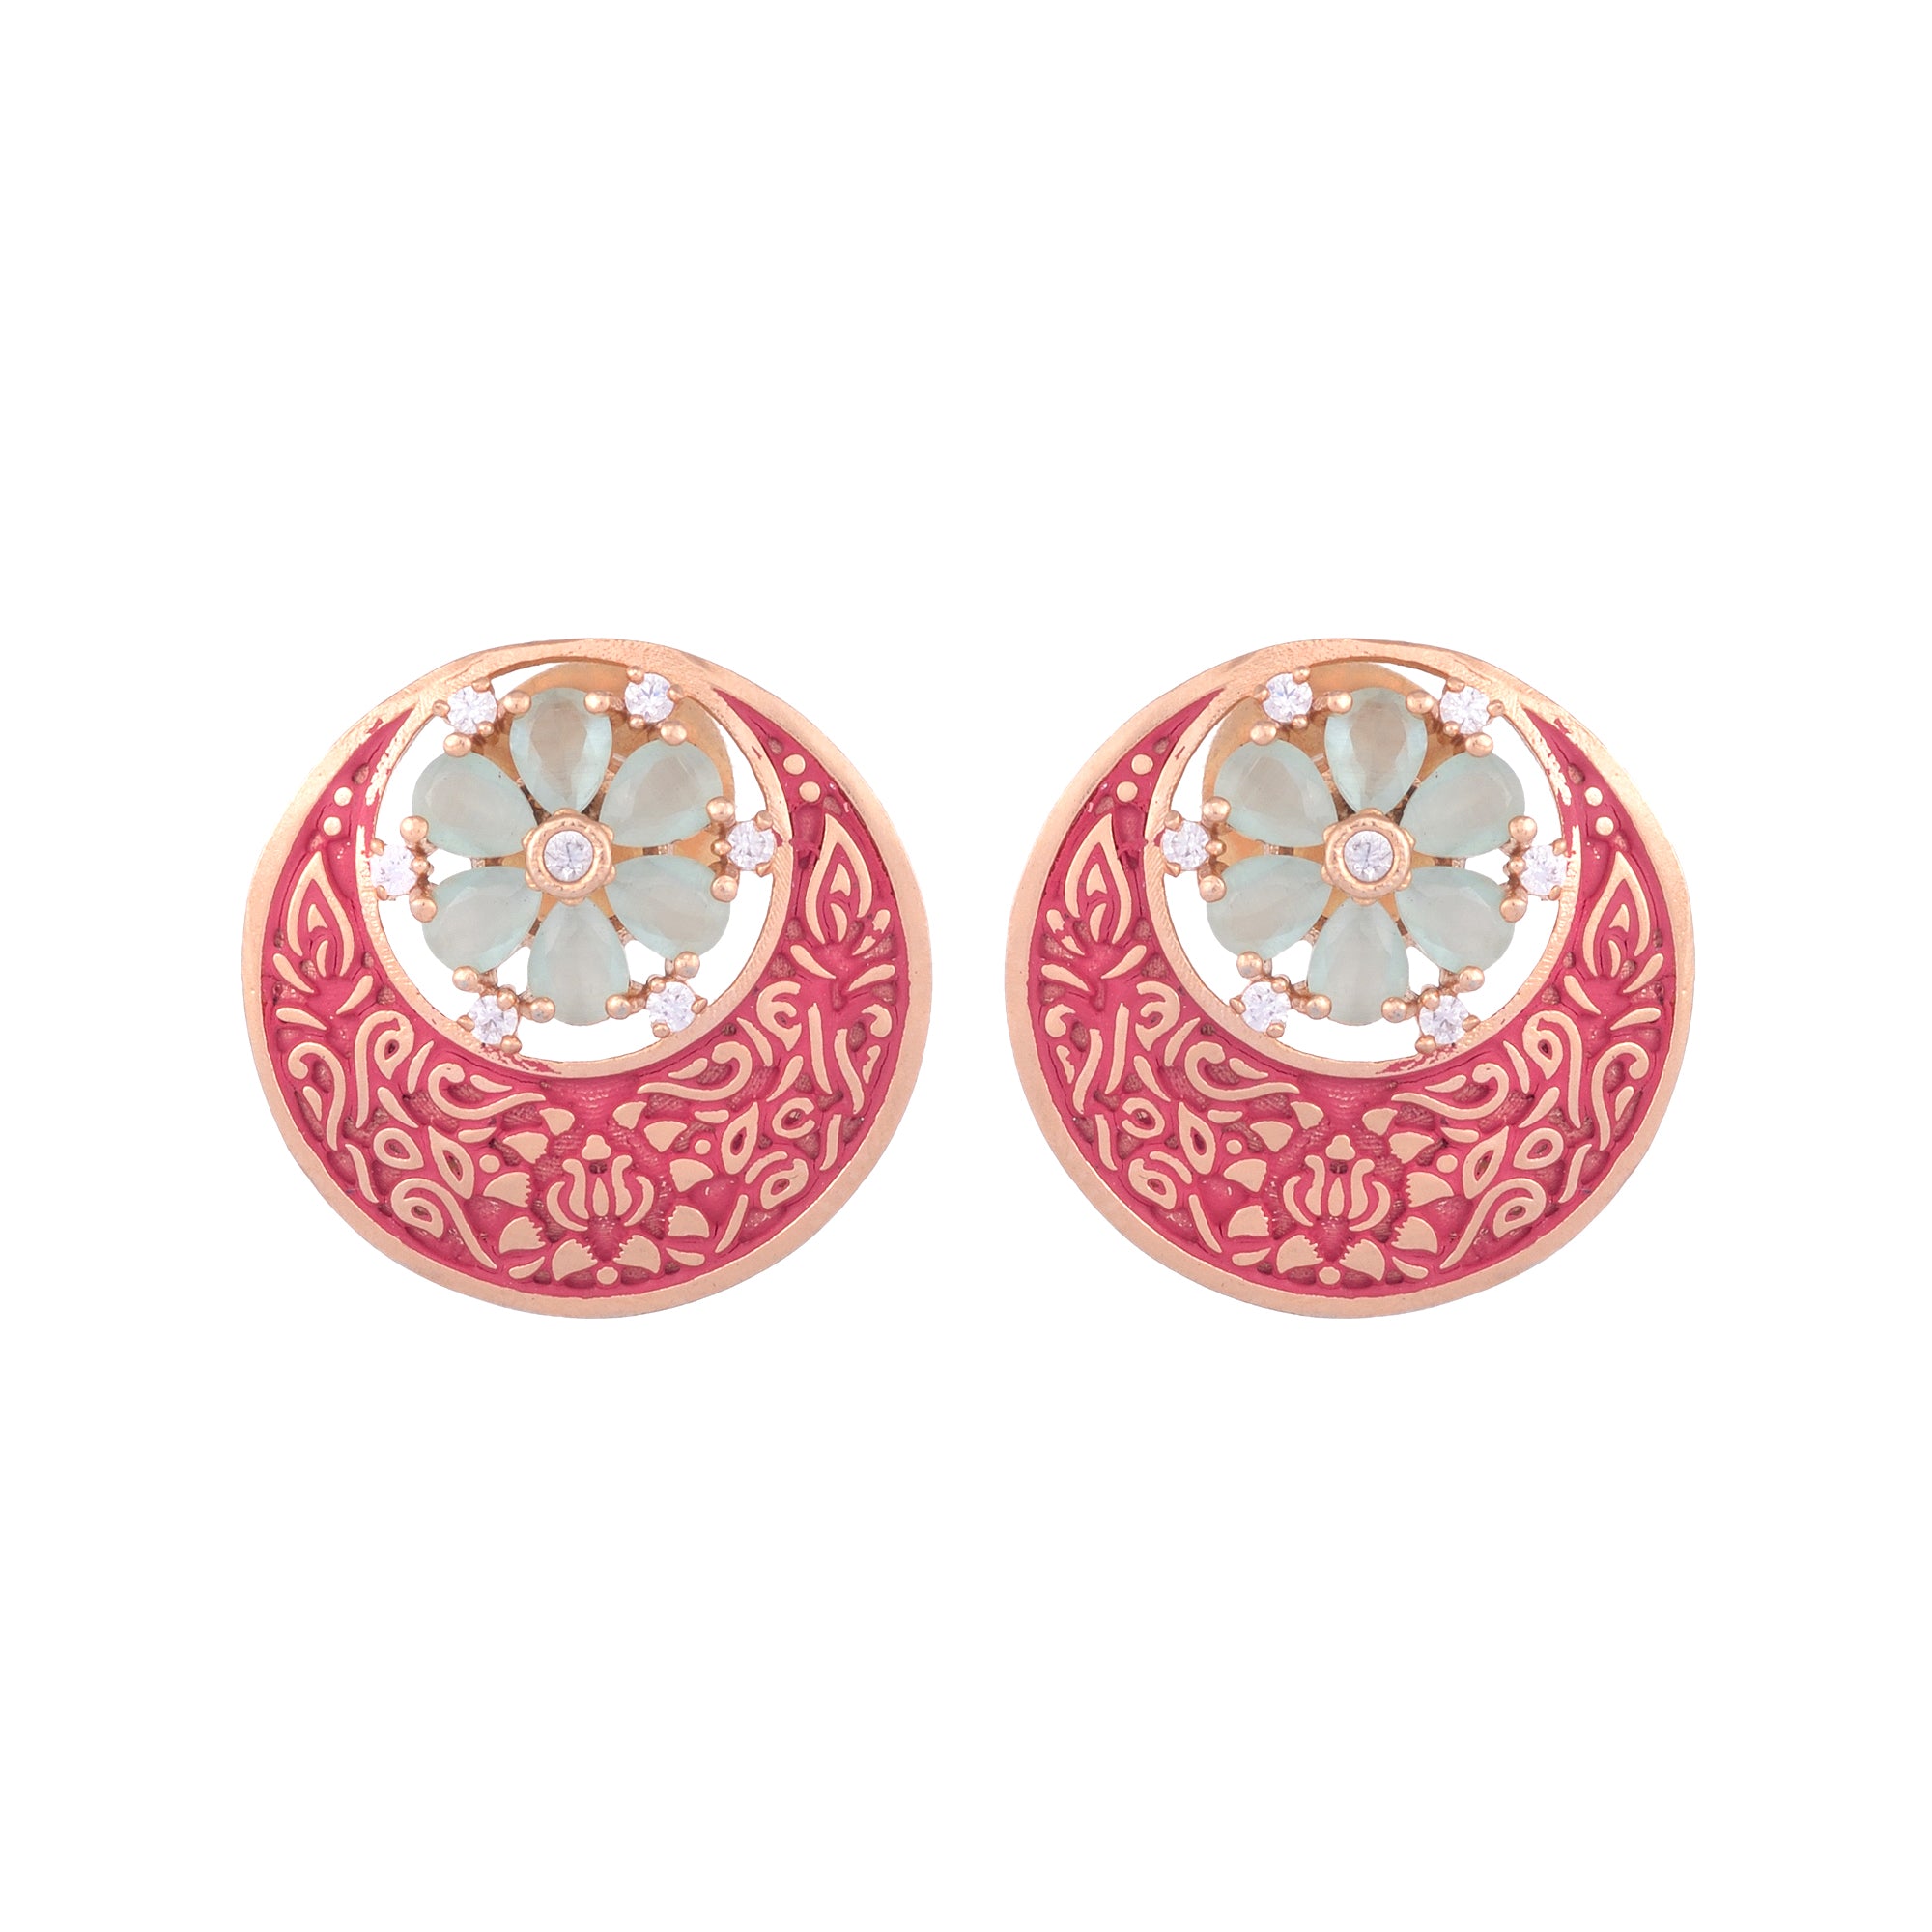 Beautiful Red Enamelled Studs Chandbali Stylesmall Earrings With Blue Diamond Embellishments for Women and Girls - Saraf RS Jewellery